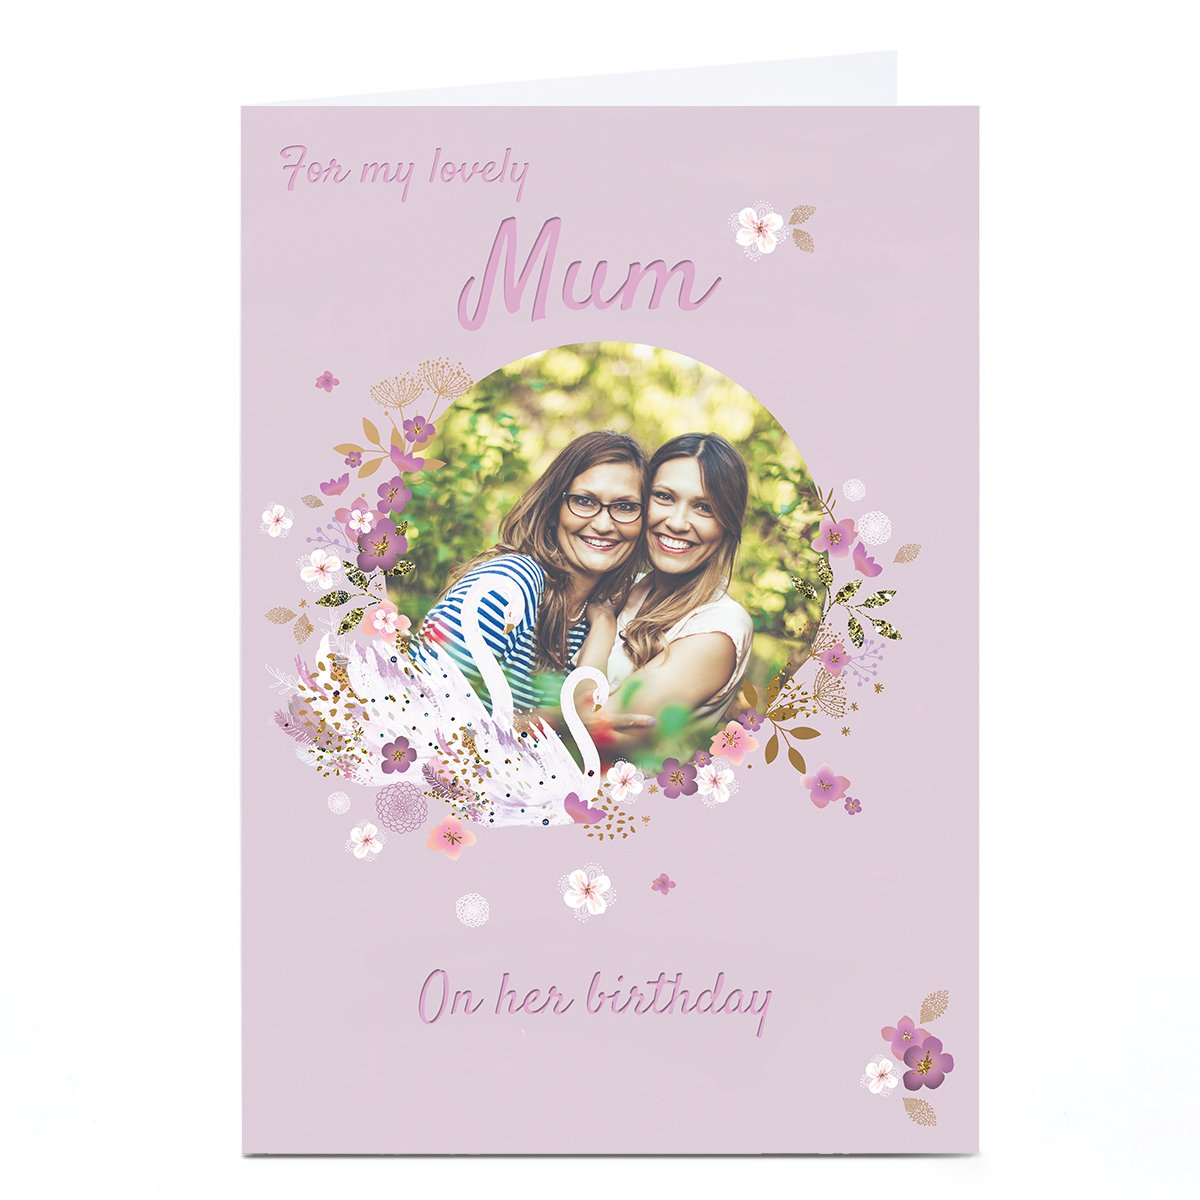 Personalised Kerry Spurling Photo Card - Lovely Mum